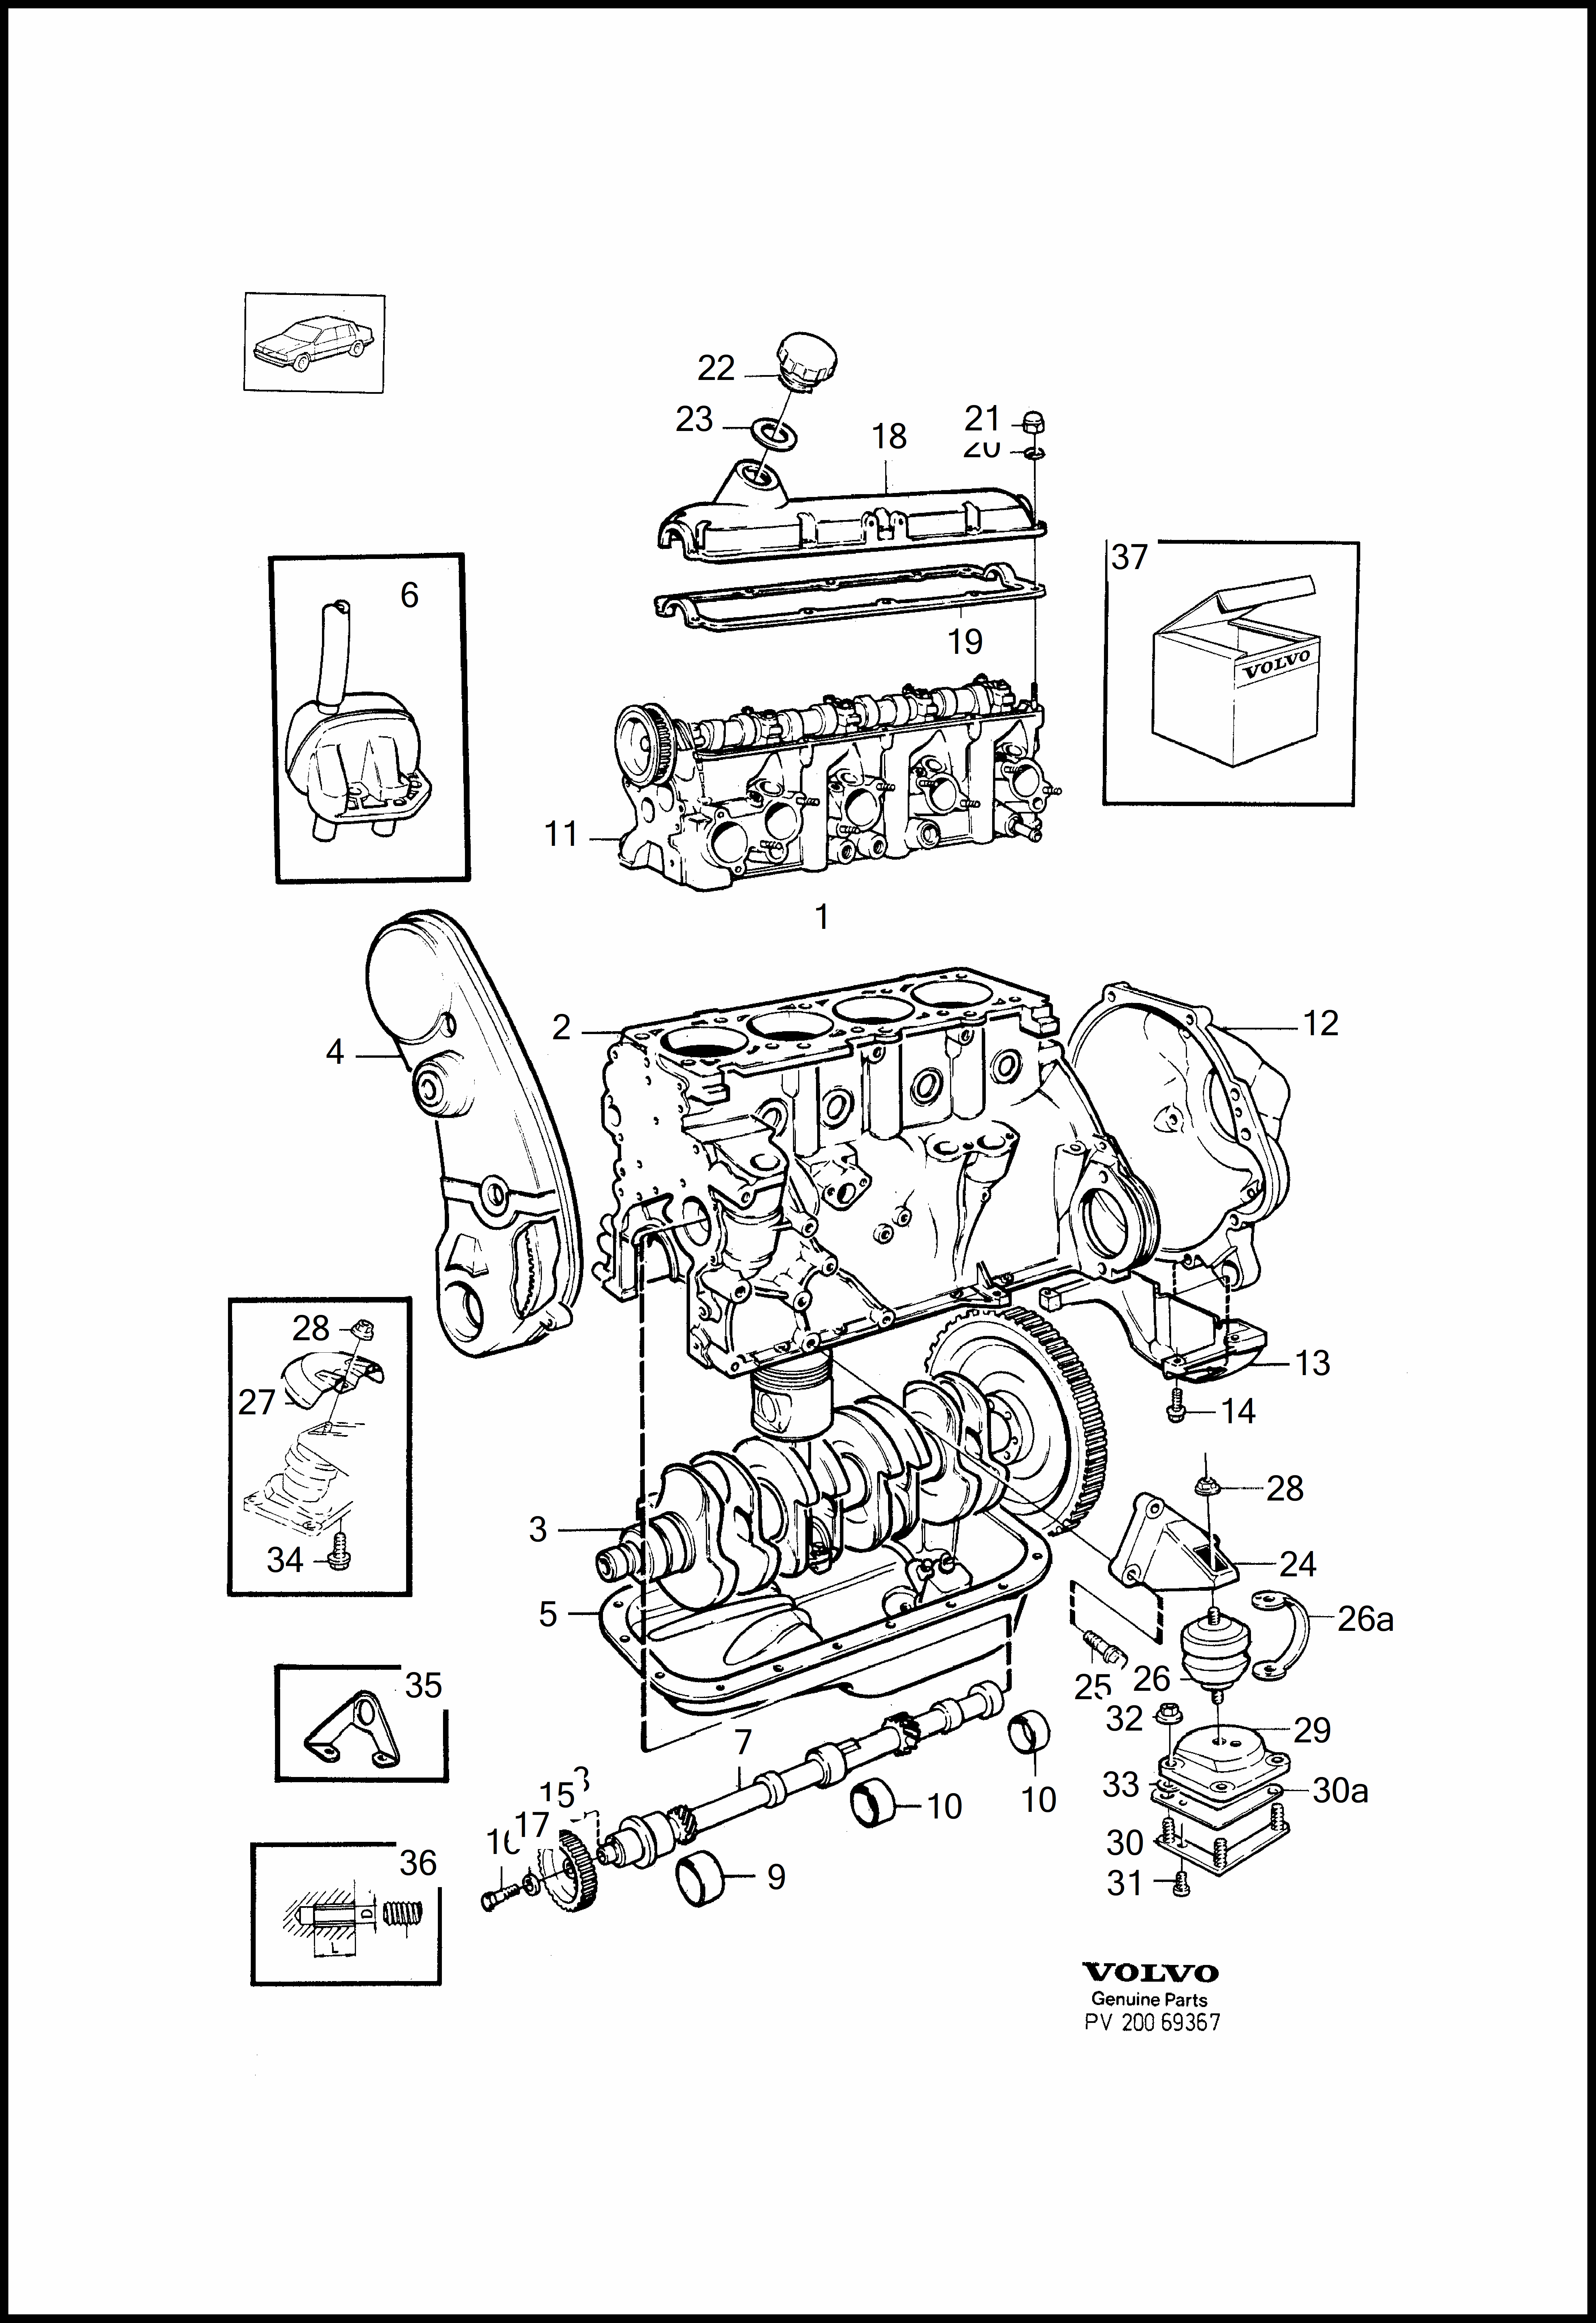 engine with fittings pro Volvo 760 760